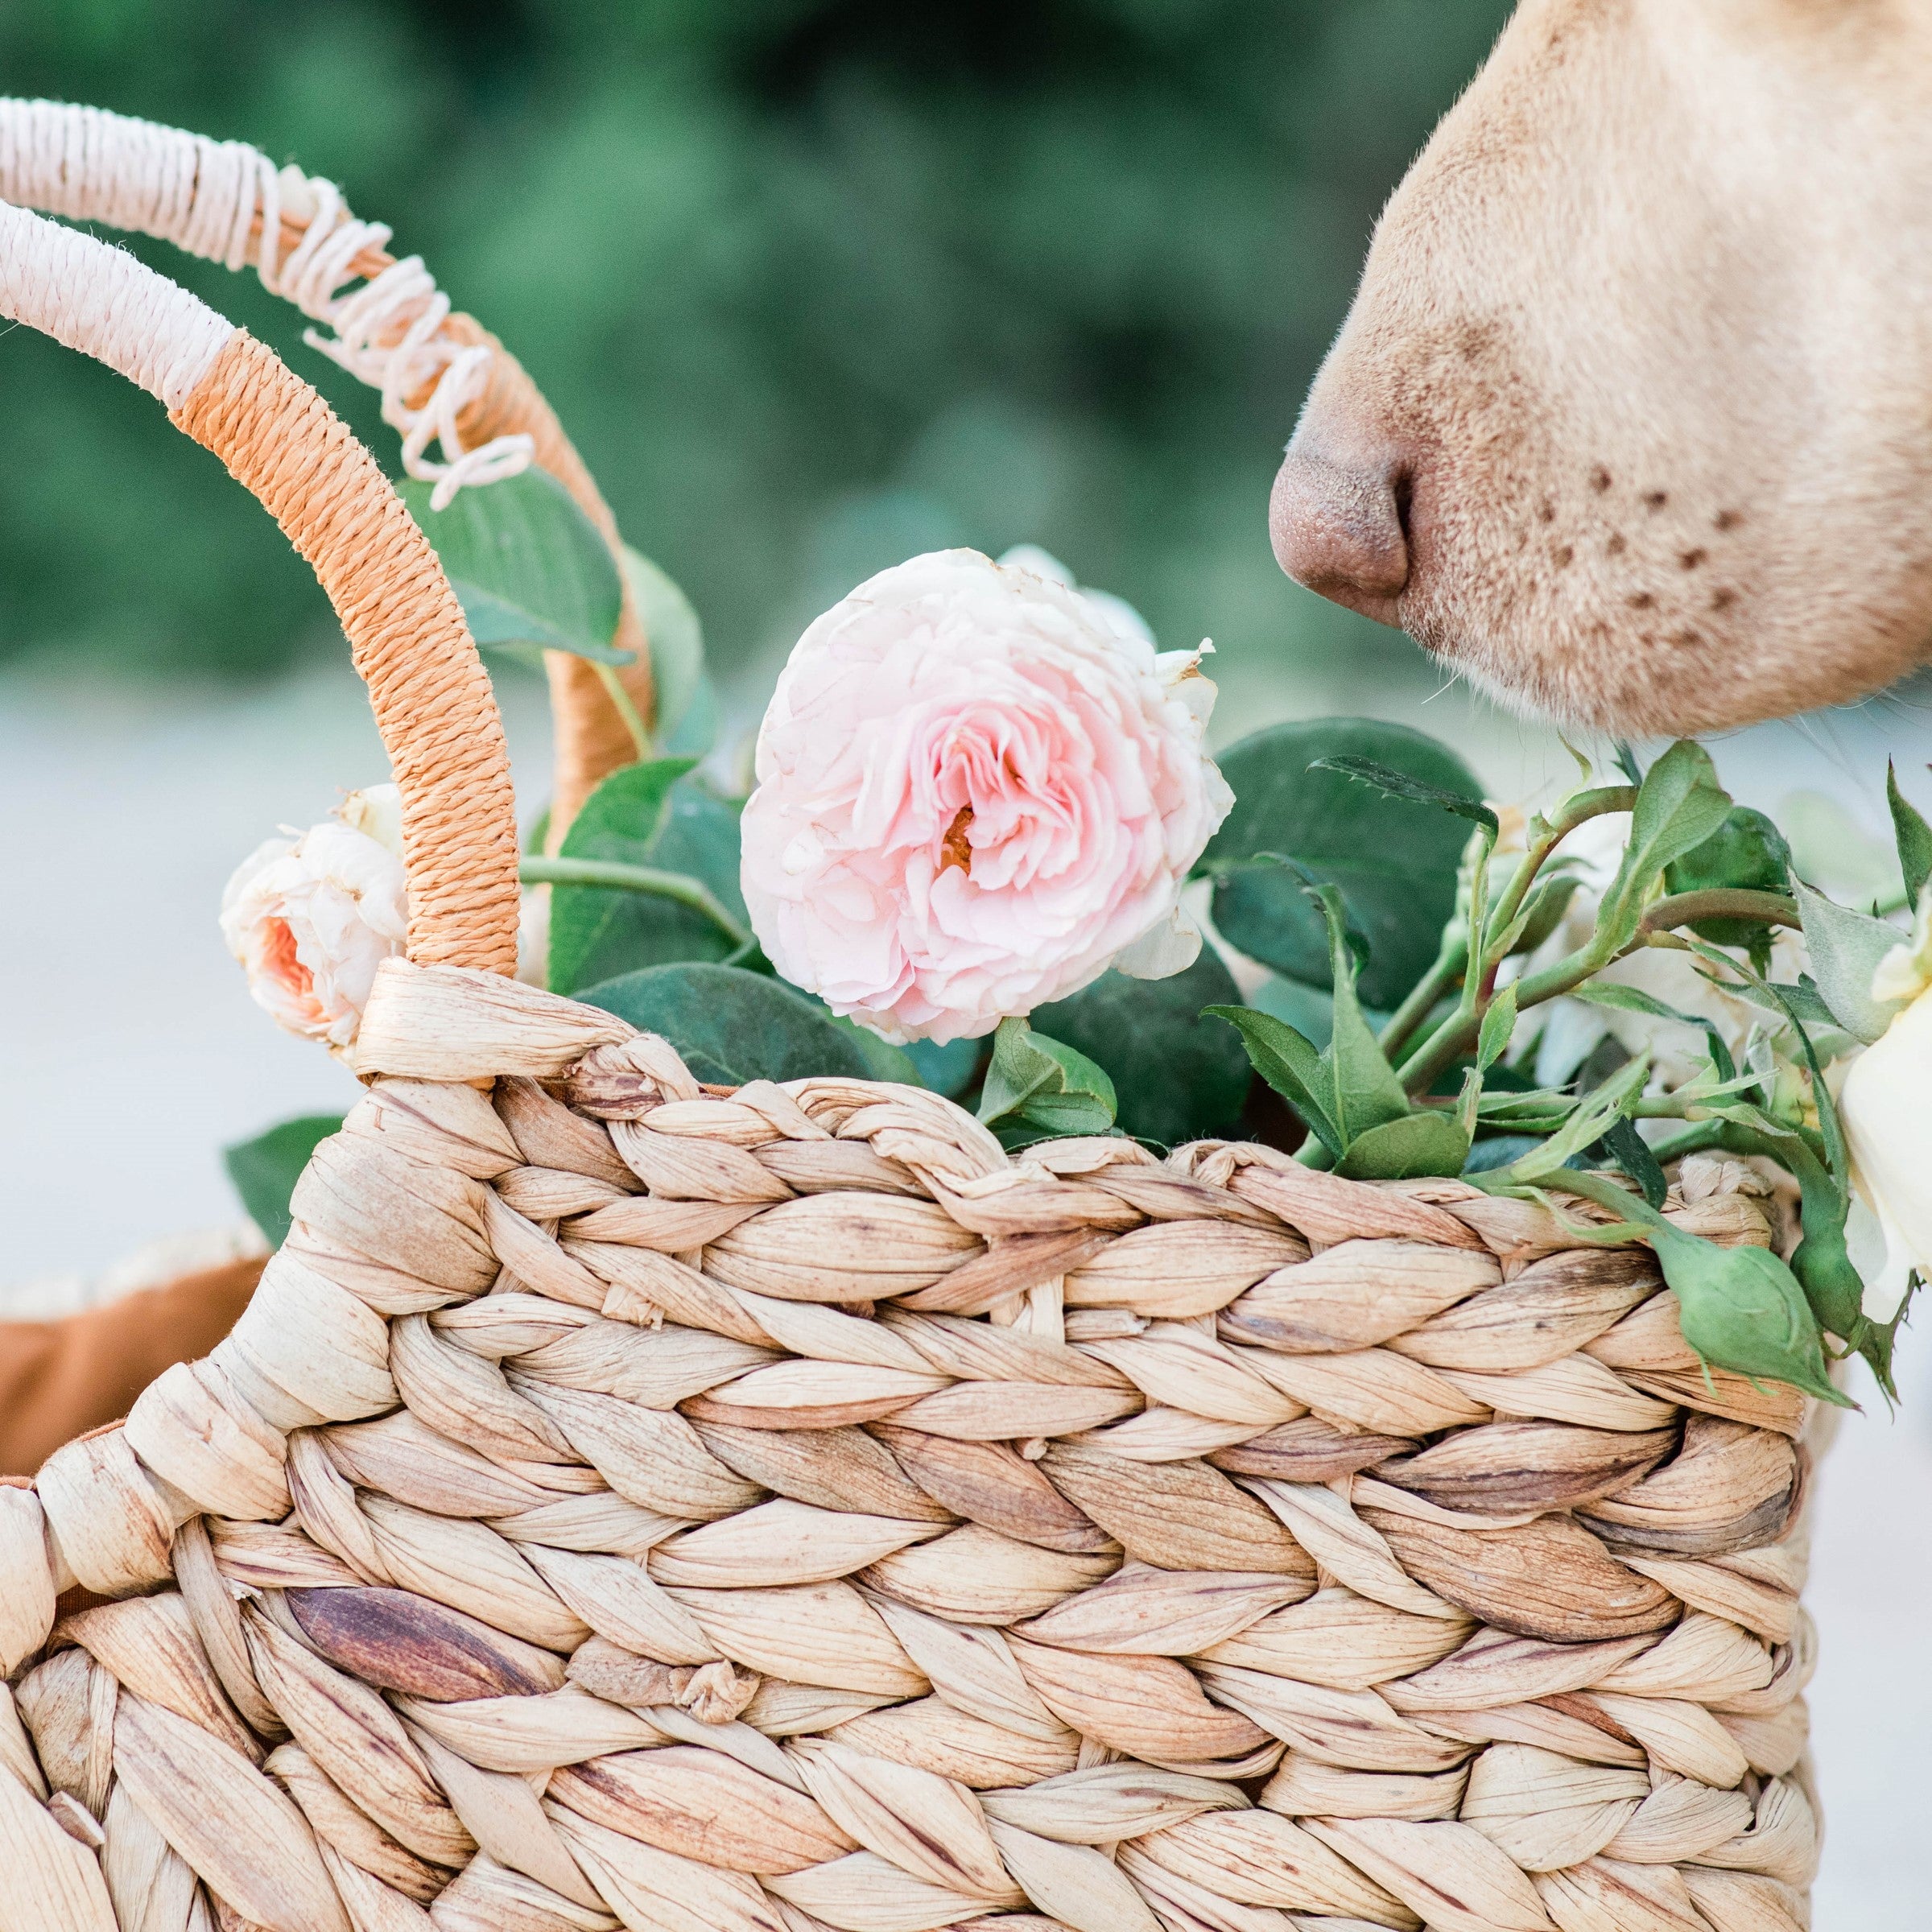 A woven basket with peach-hued fabric lining and delicate pink roses, complemented by the soft, curious nose of a light-colored dog, encapsulating a serene, springtime moment.